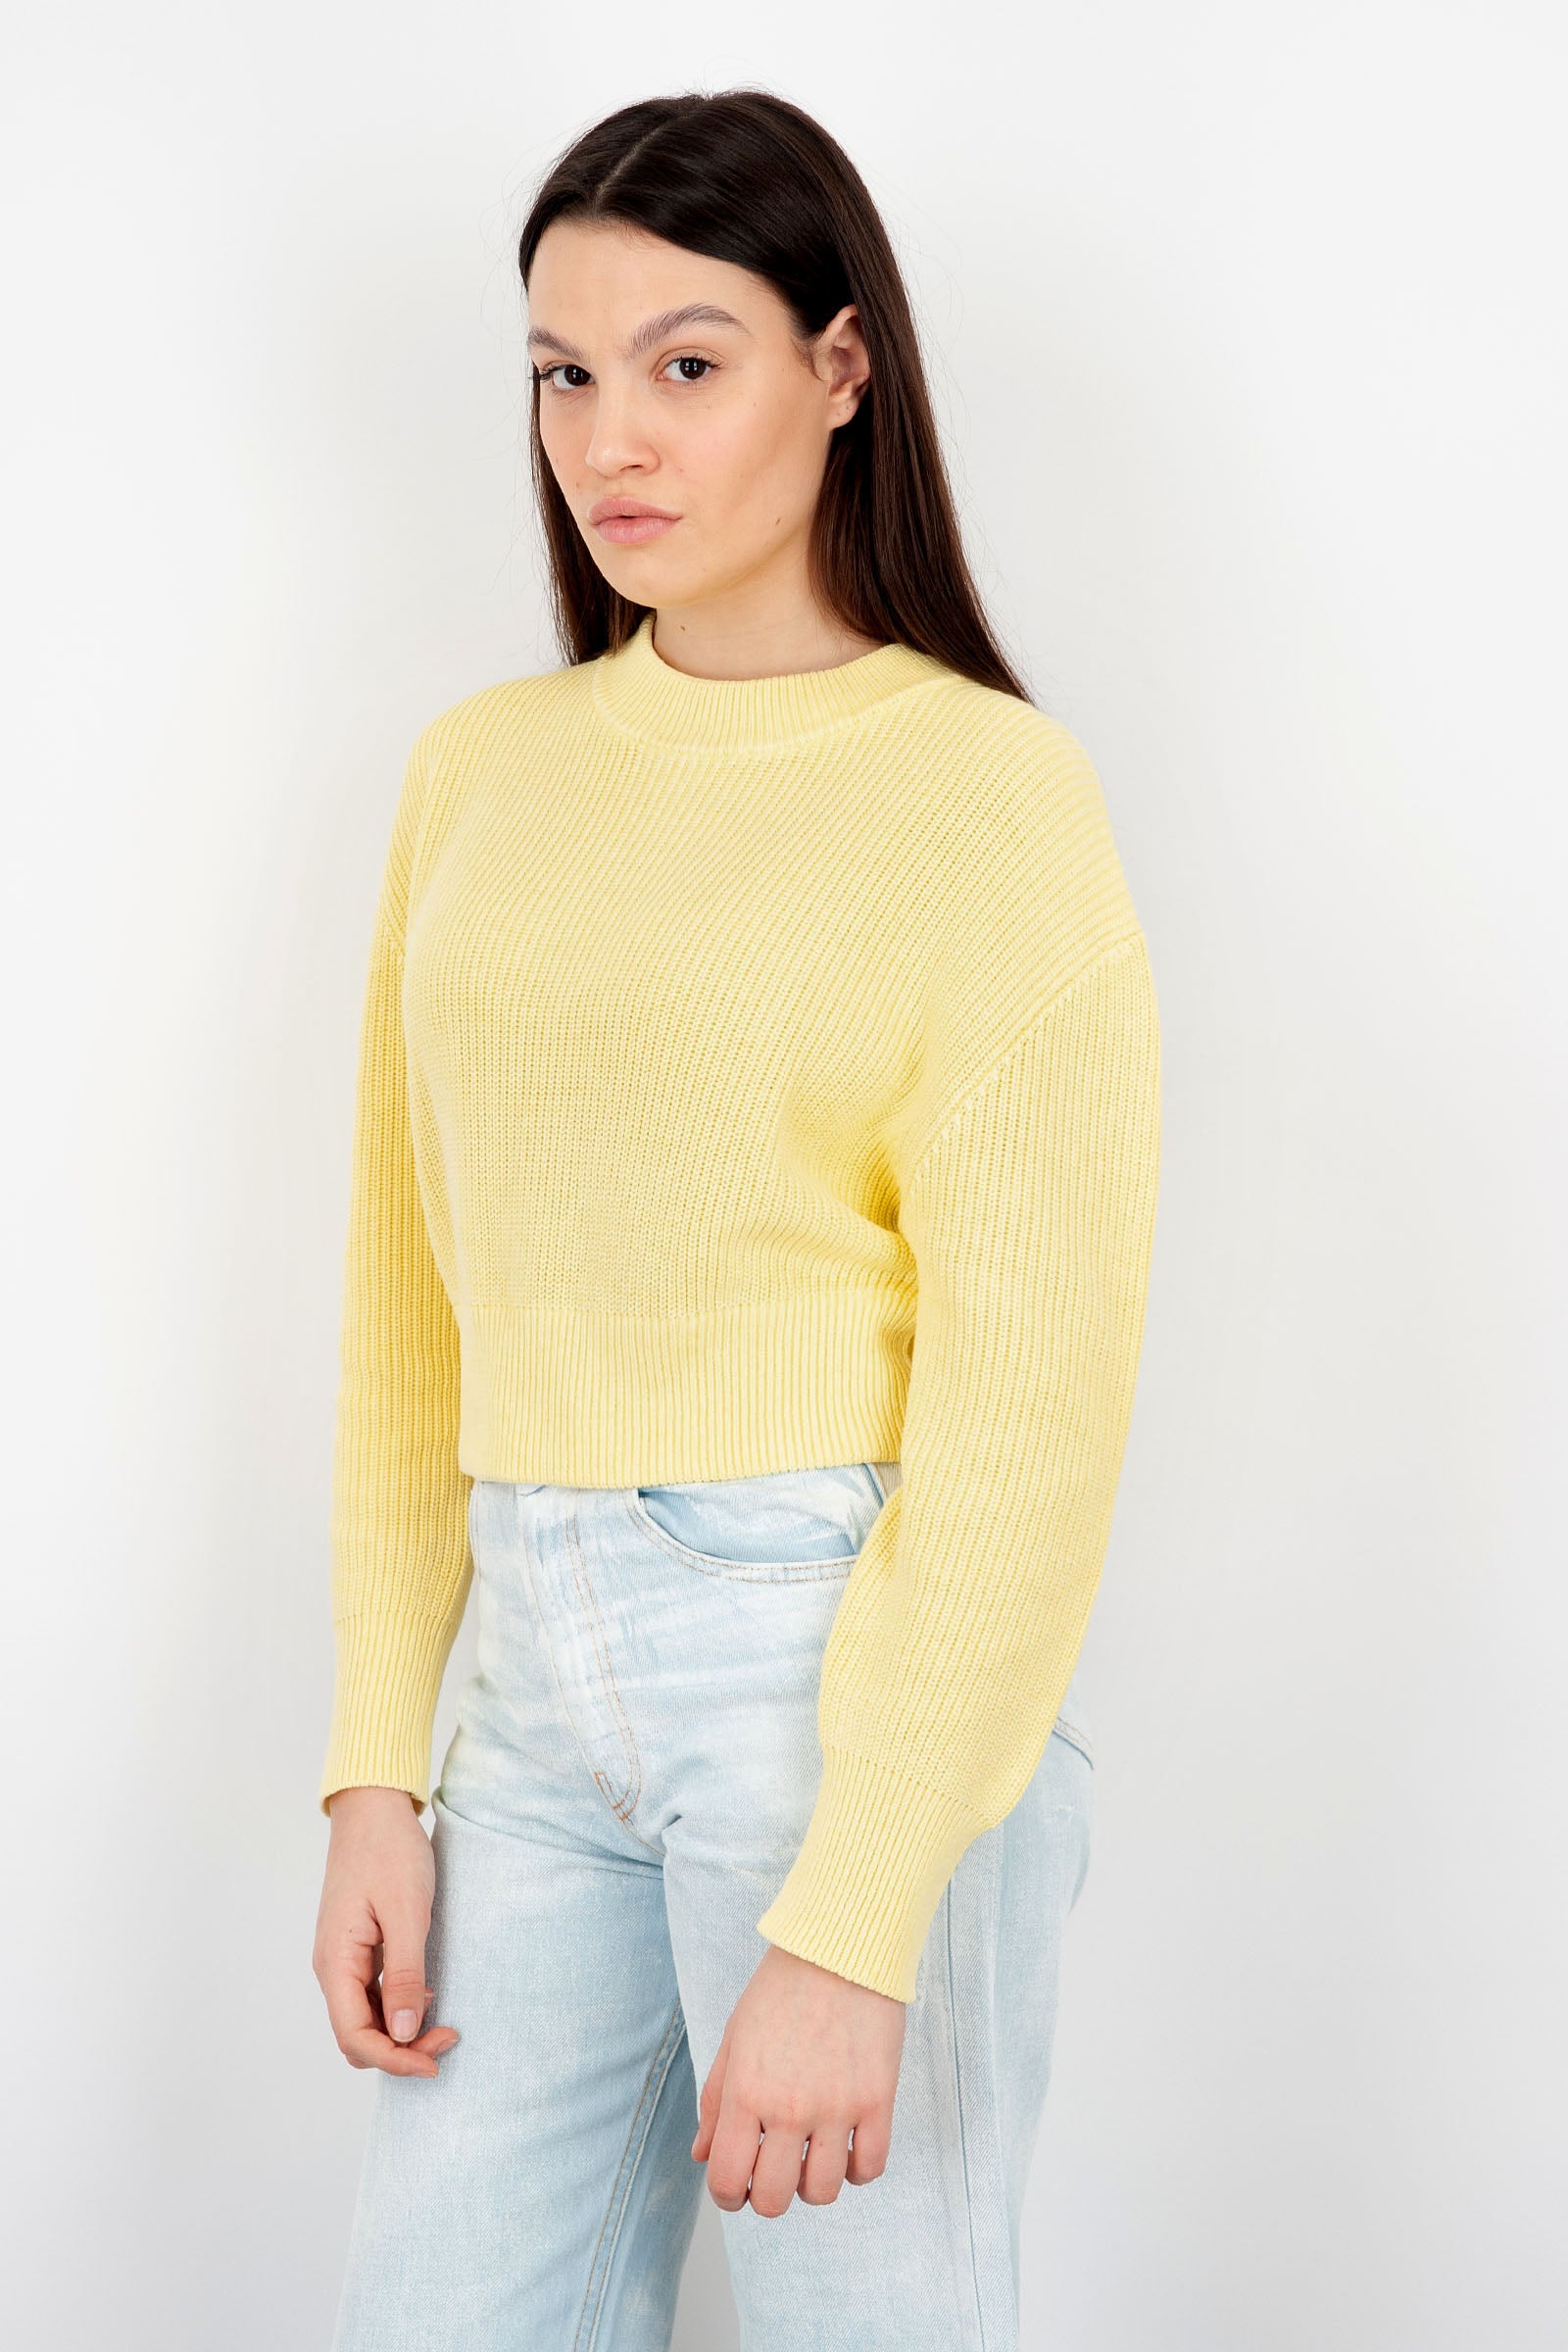 Absolut Cashmere Edith Cotton Yellow Sweater - 3